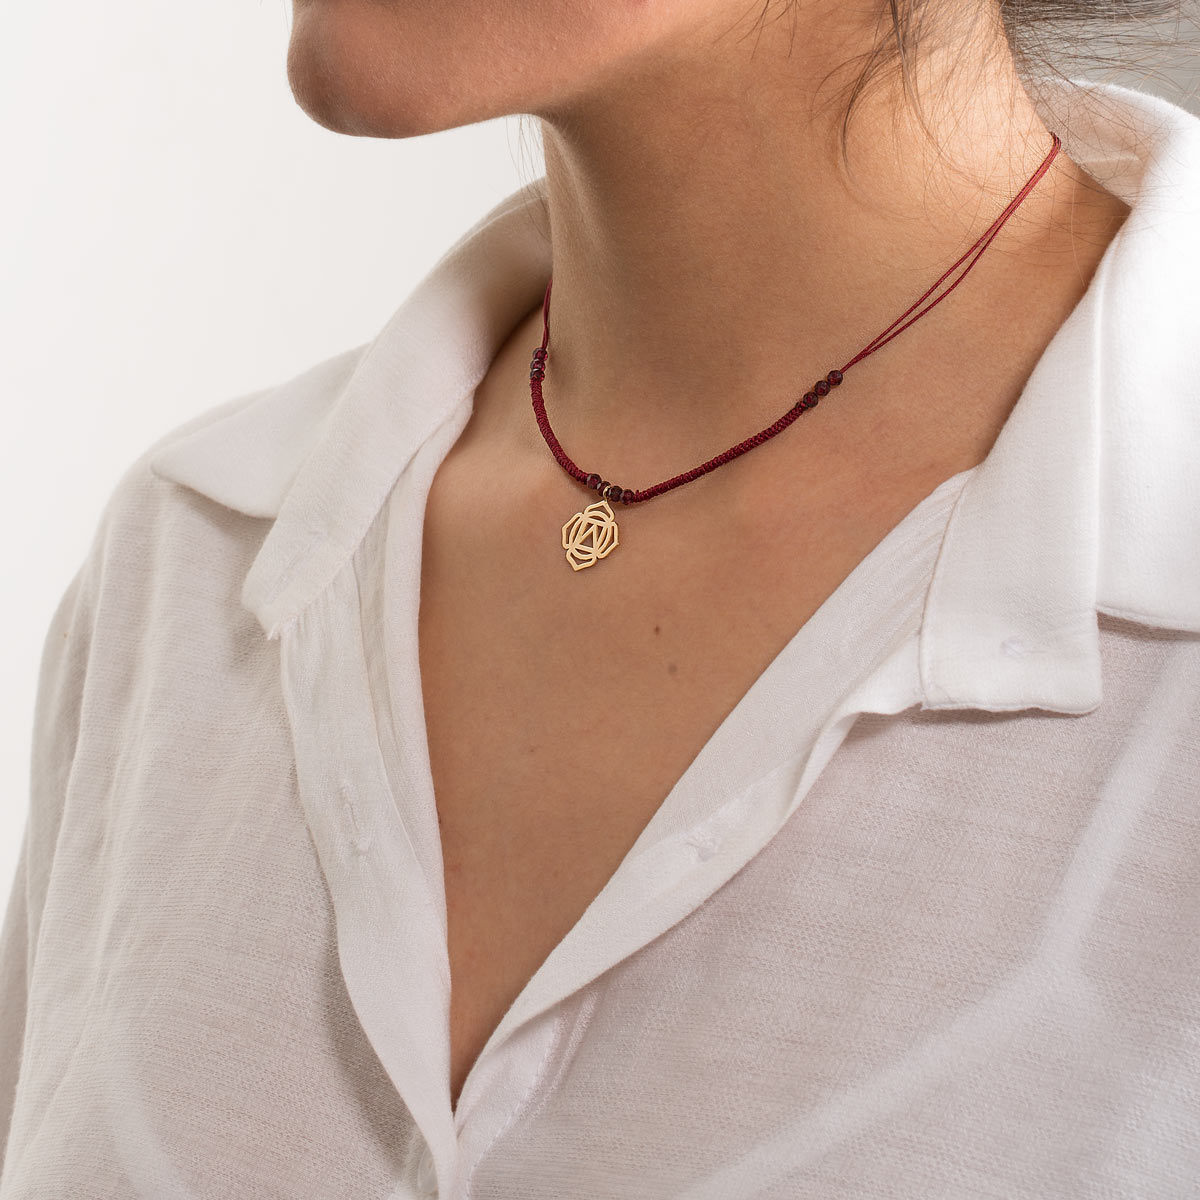 Root chakra woven gold necklace in